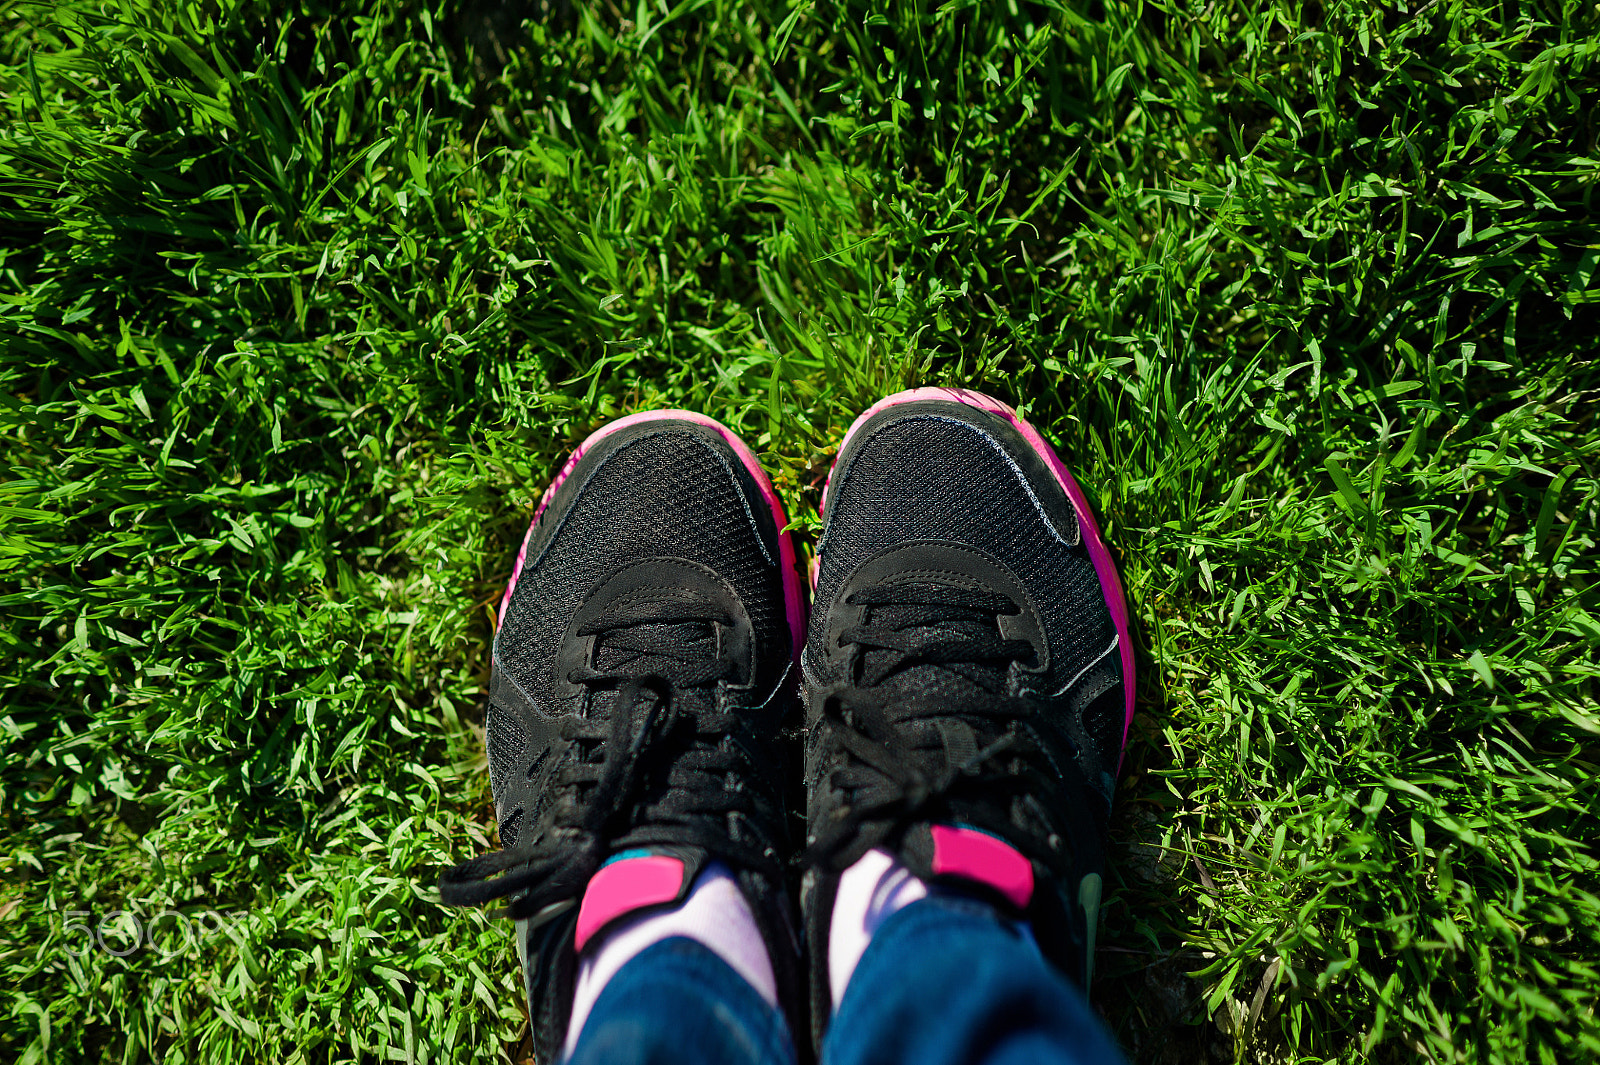 Nikon D700 sample photo. Selfie of female feet on black sneakers standing on green grass photography